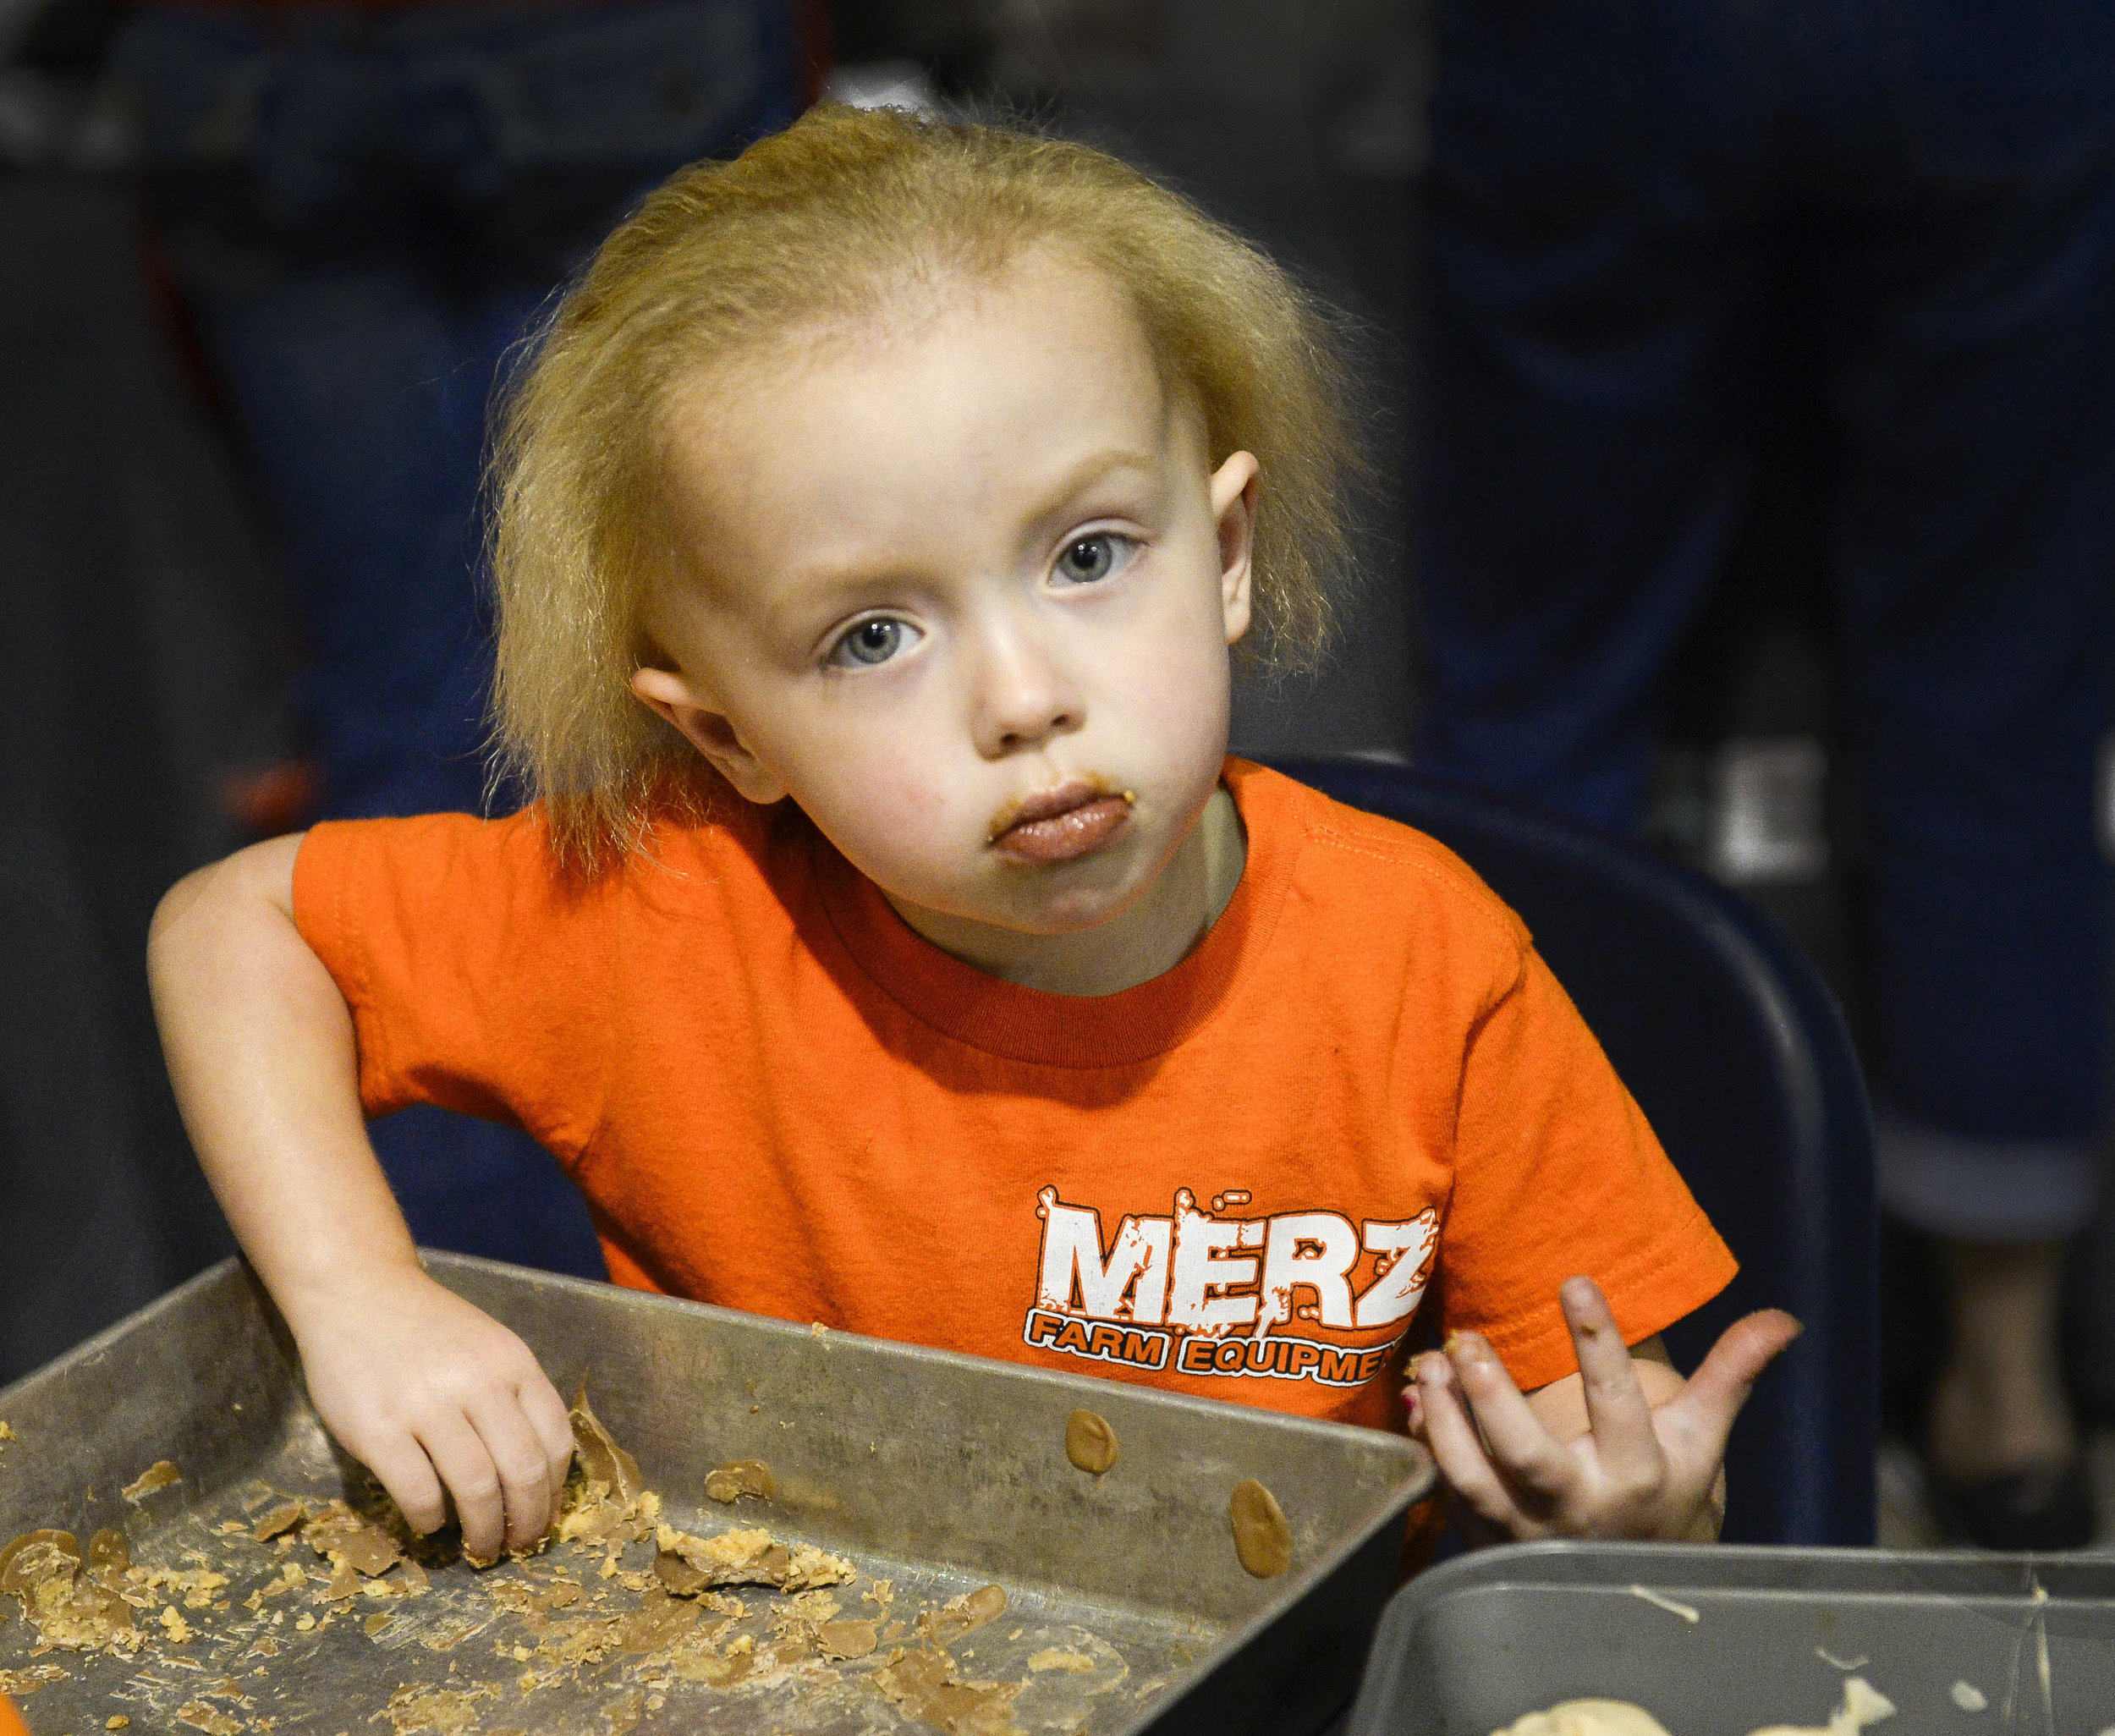   Natalie Witt, 2, finishes off a pan of leftover peanut butter and rice crispies used in making peanut butter bacon balms for the dessert recipe contest. Witt was there with Merz Farm Equipment who came from Fall City, Neb. to participate in the Bac